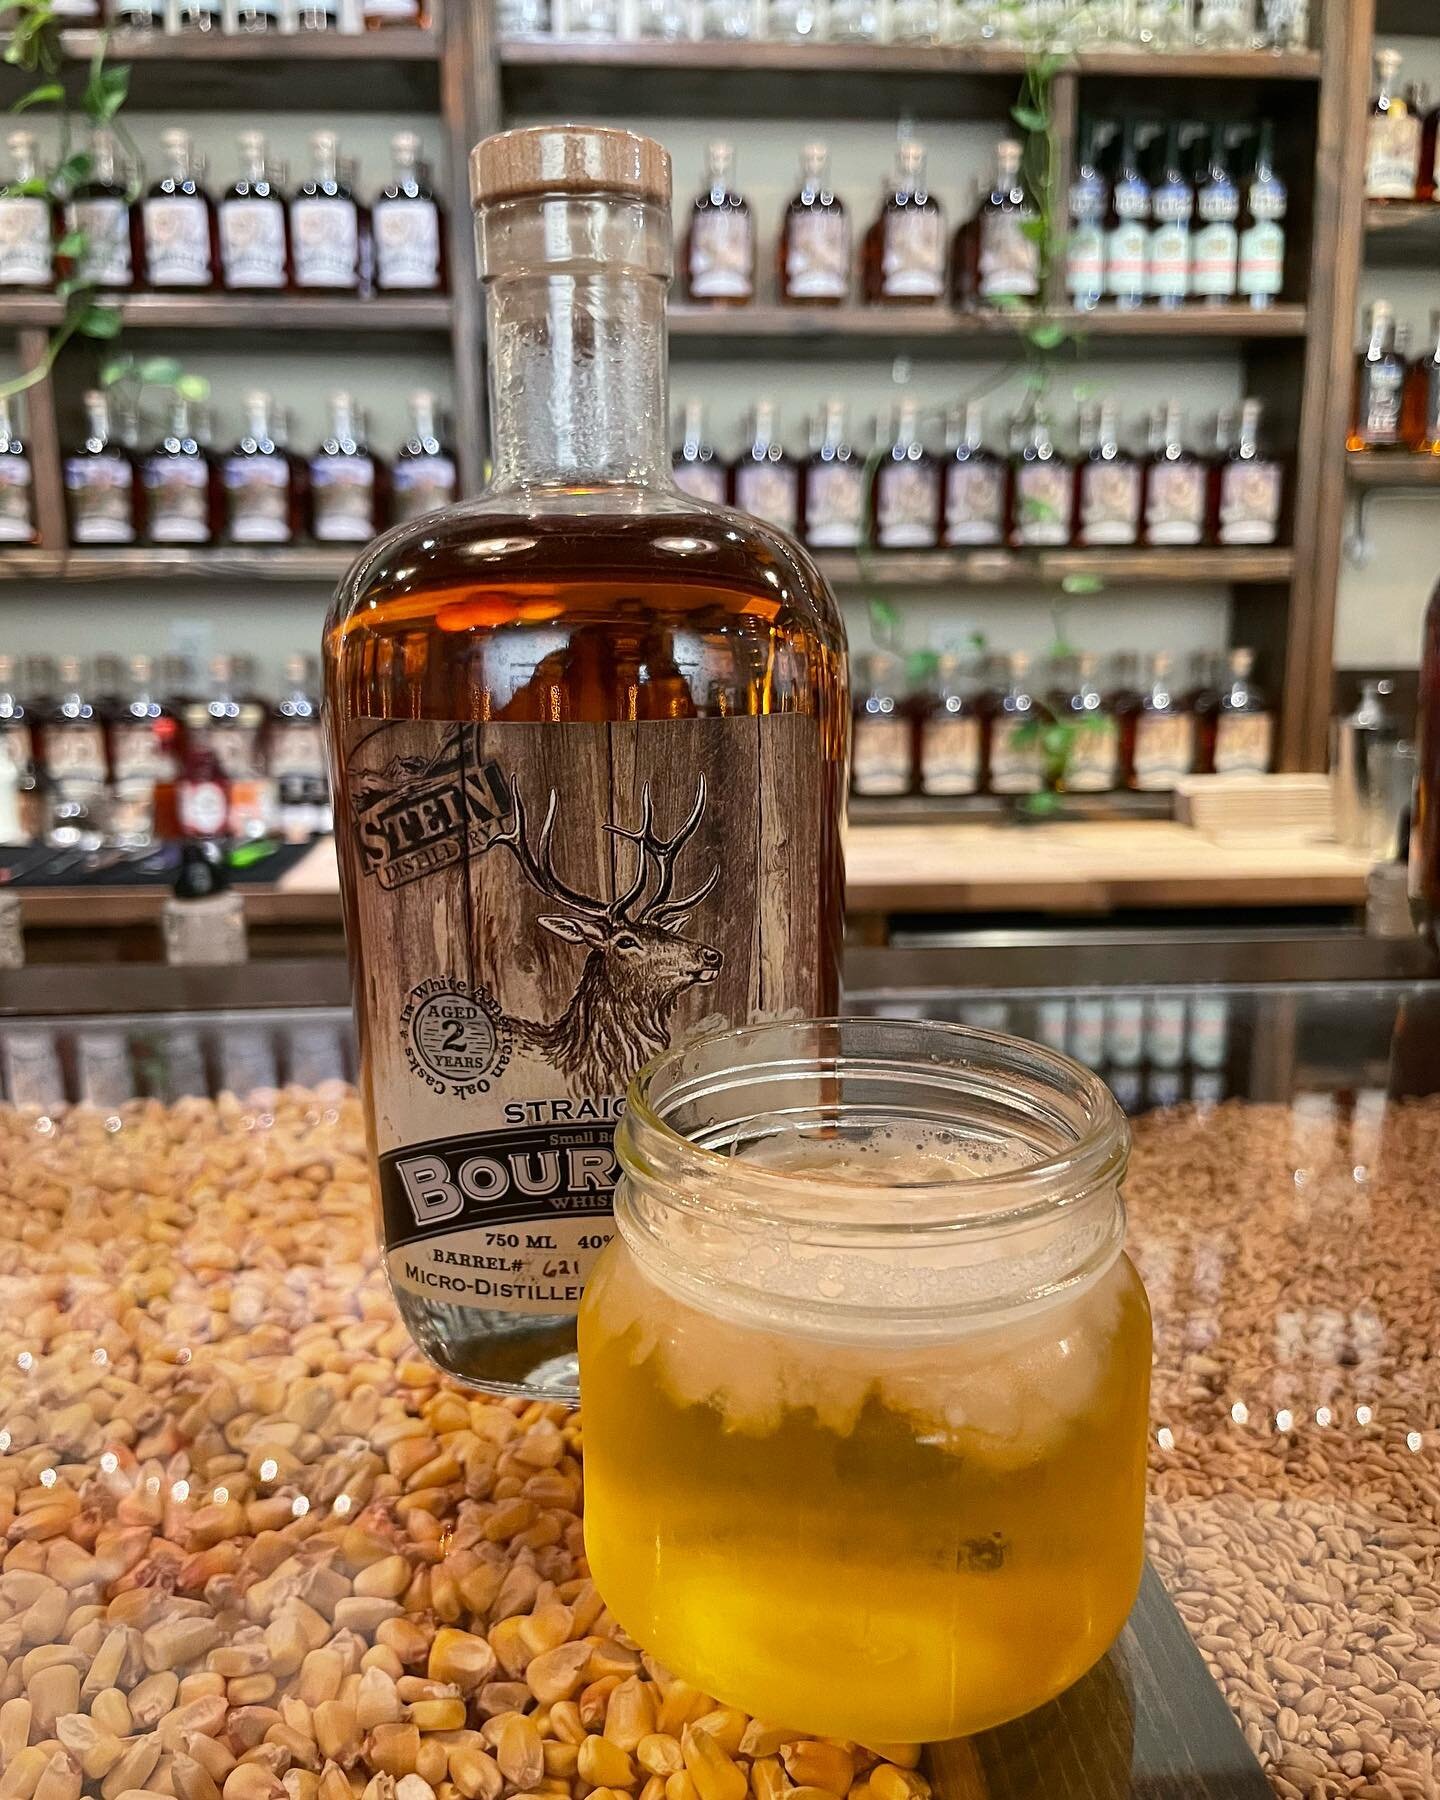 🍑Peachy-B🐝

A bourbon goodness with just the right amount of peachy flavors and club soda. 

We will be showcasing this at our tasting room in Lake Oswego in celebration of the new year! Come see us! 
.
.
.
.

#cocktails #craftspirits #whiskey #bou